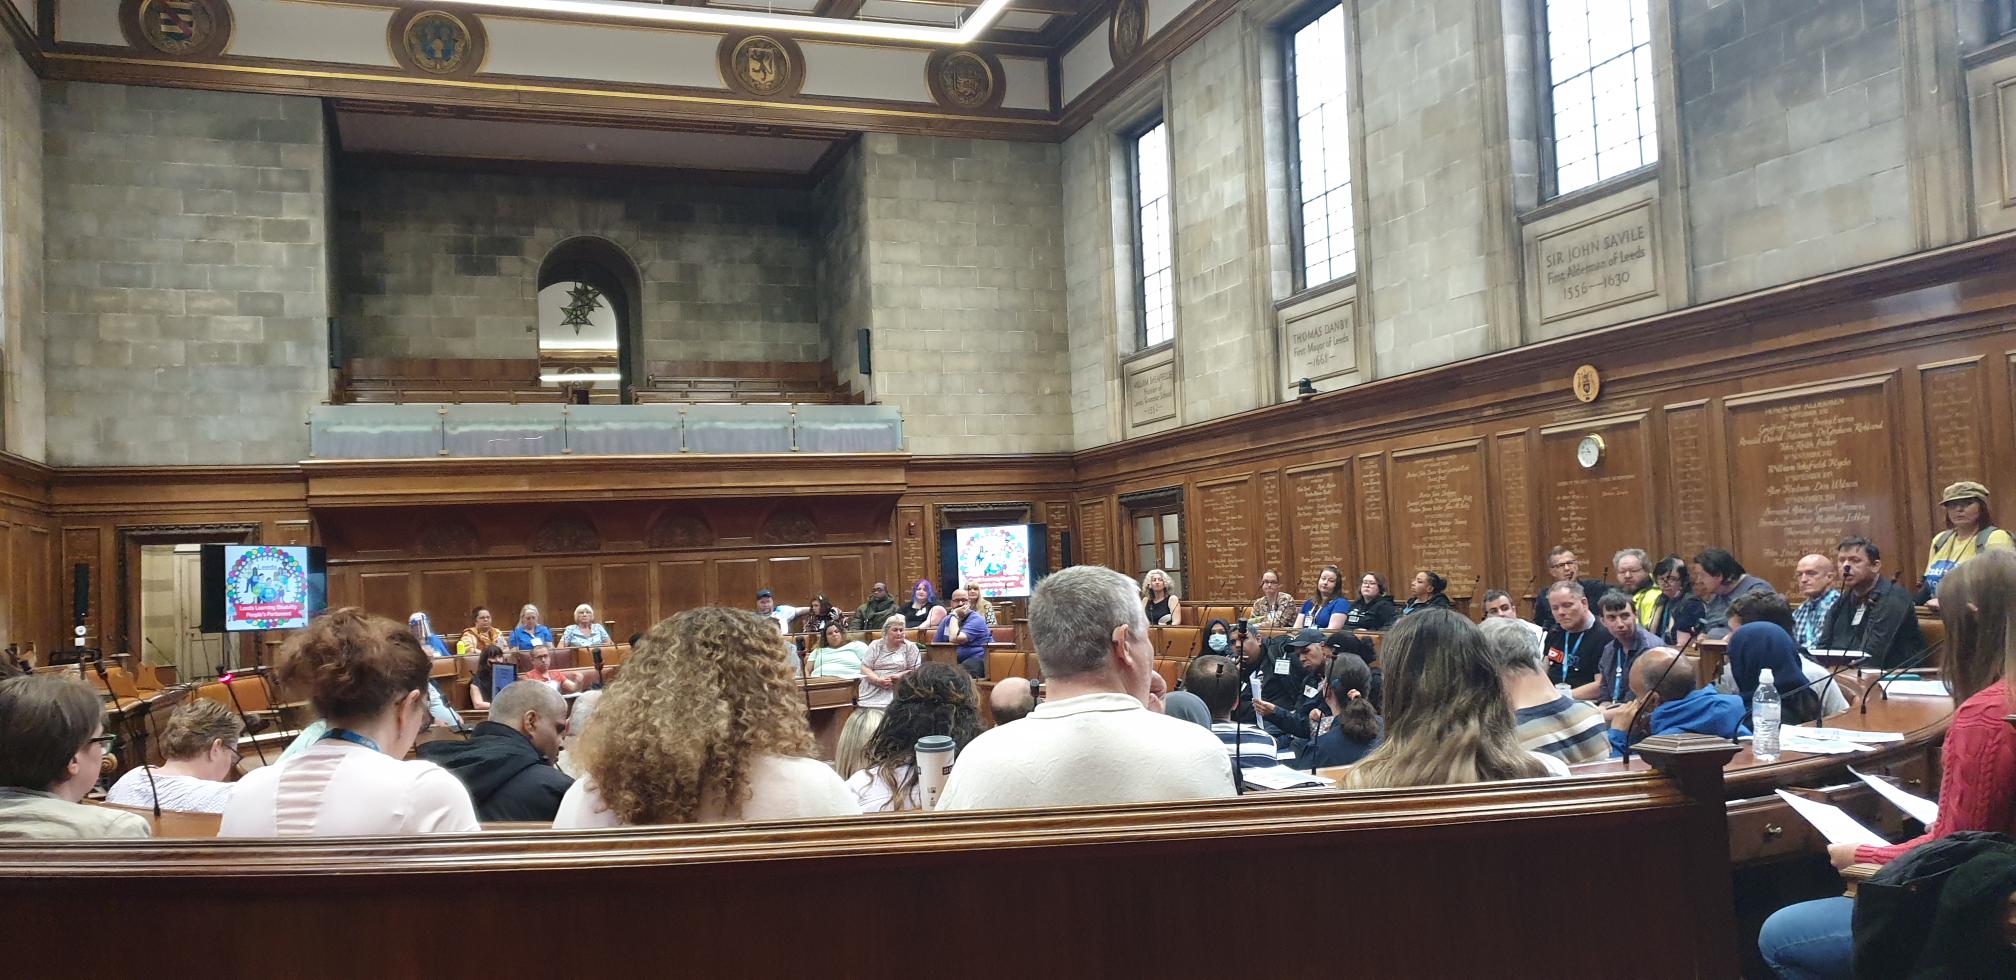 An image from the 2023 Council Chamber Takeover. There are people sat in a room in Leeds Civic Hall, in circular rows of seats facing a screen.